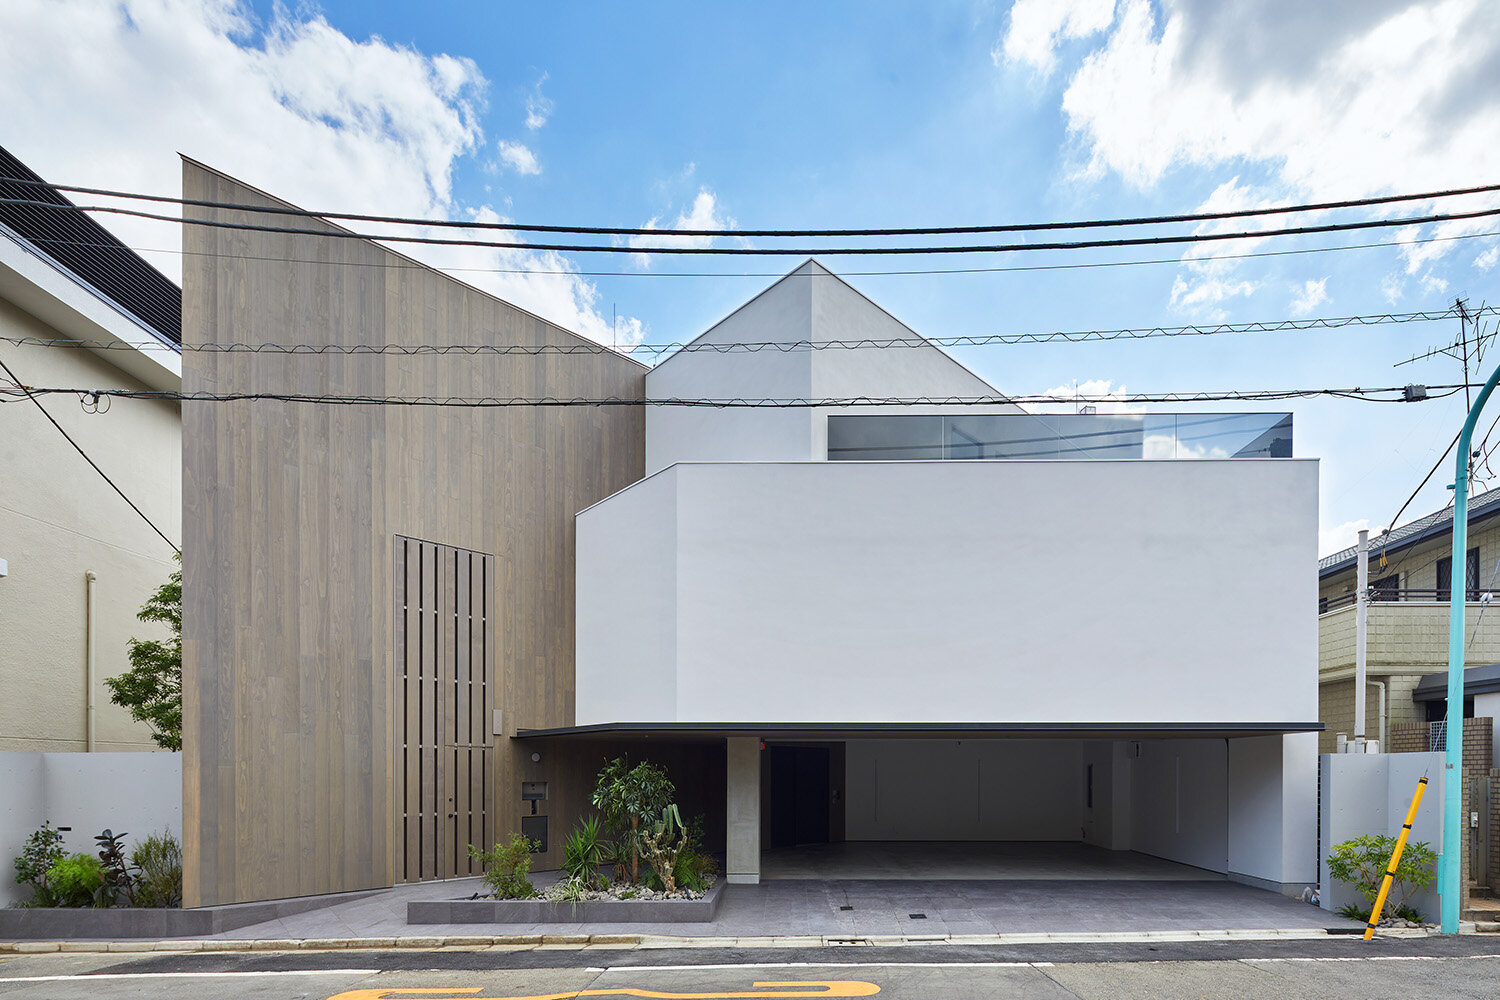  Japanese architecture design studio SINATO led by Chikara Ono has designed a residence ‘Shoto S‘ in Tokyo. 